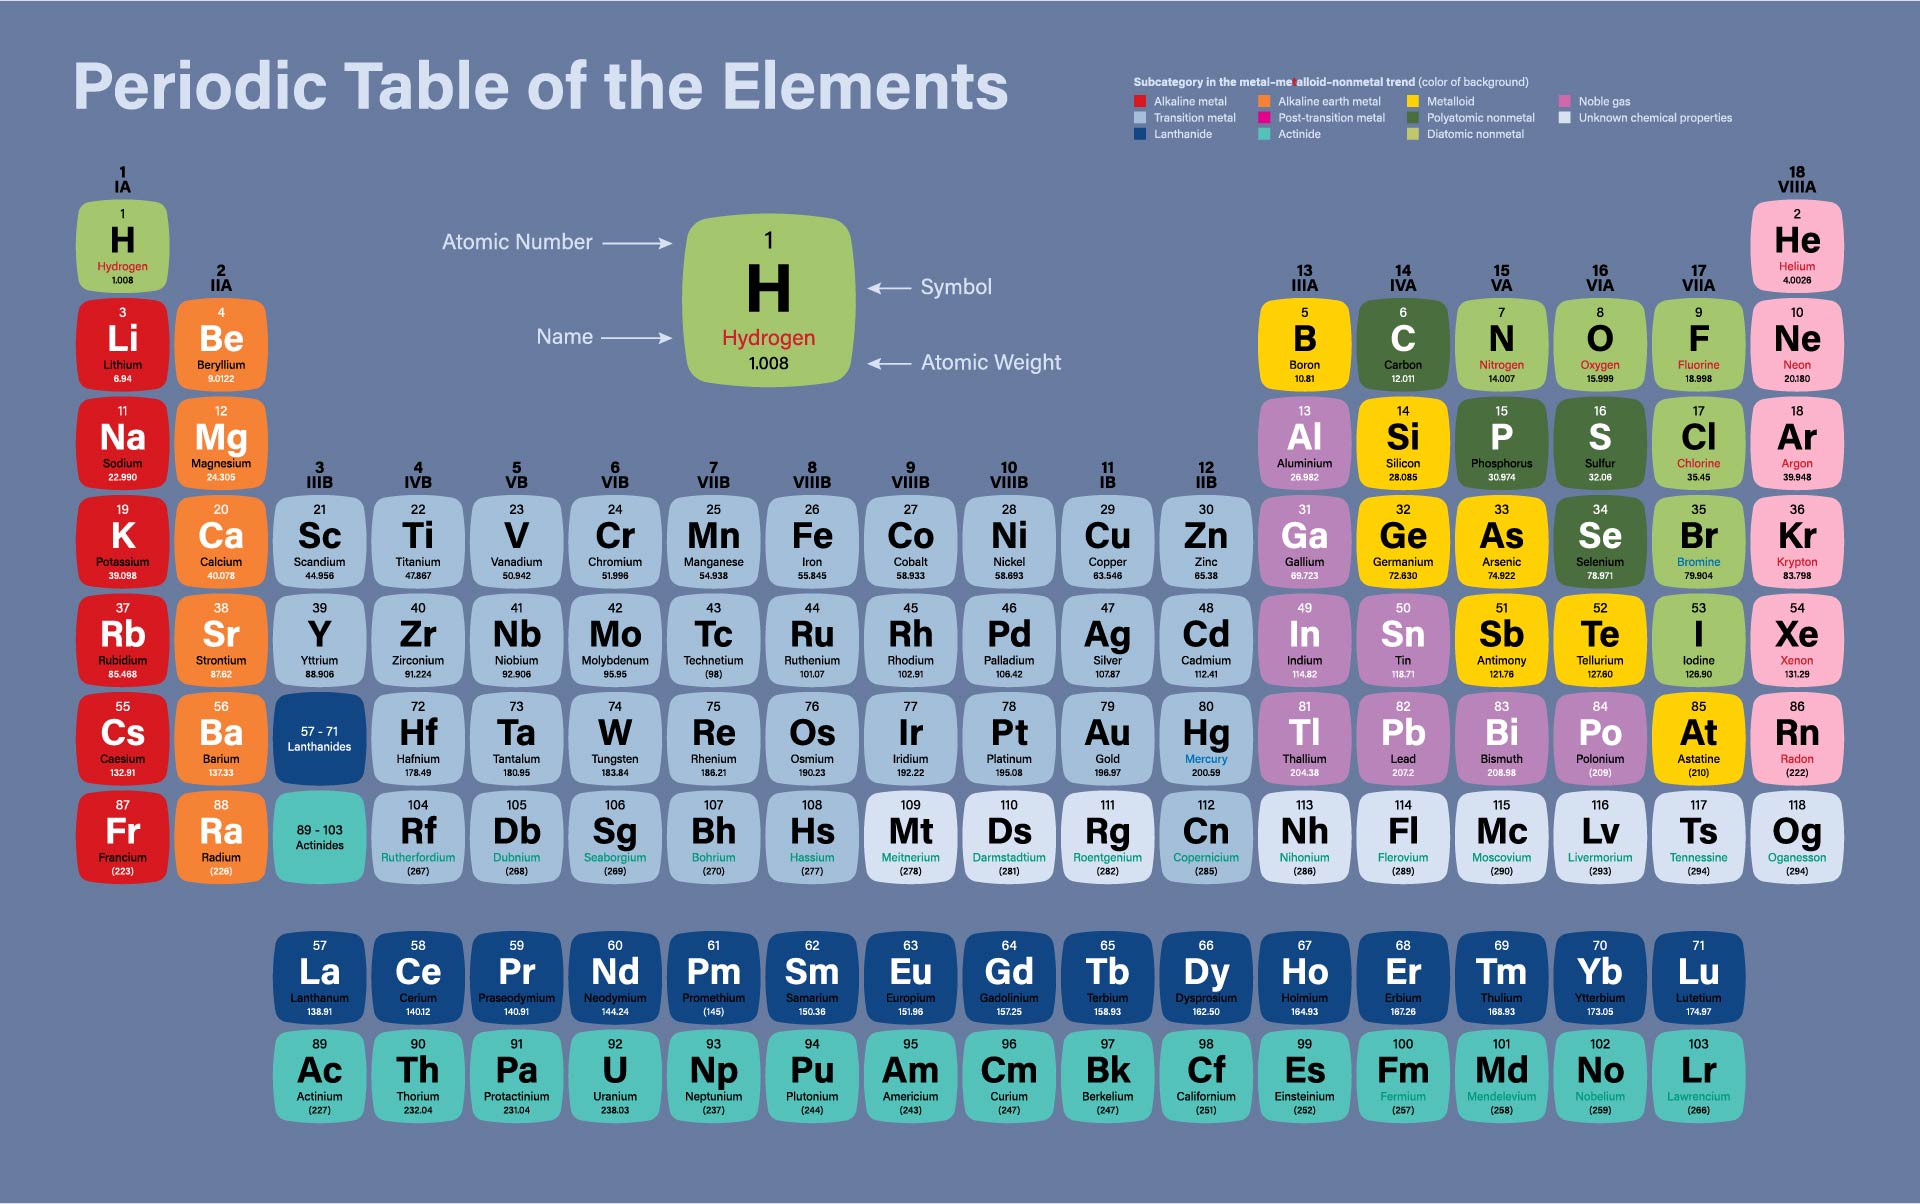 Periodic table with atomic number and atomic mass - ryterewards